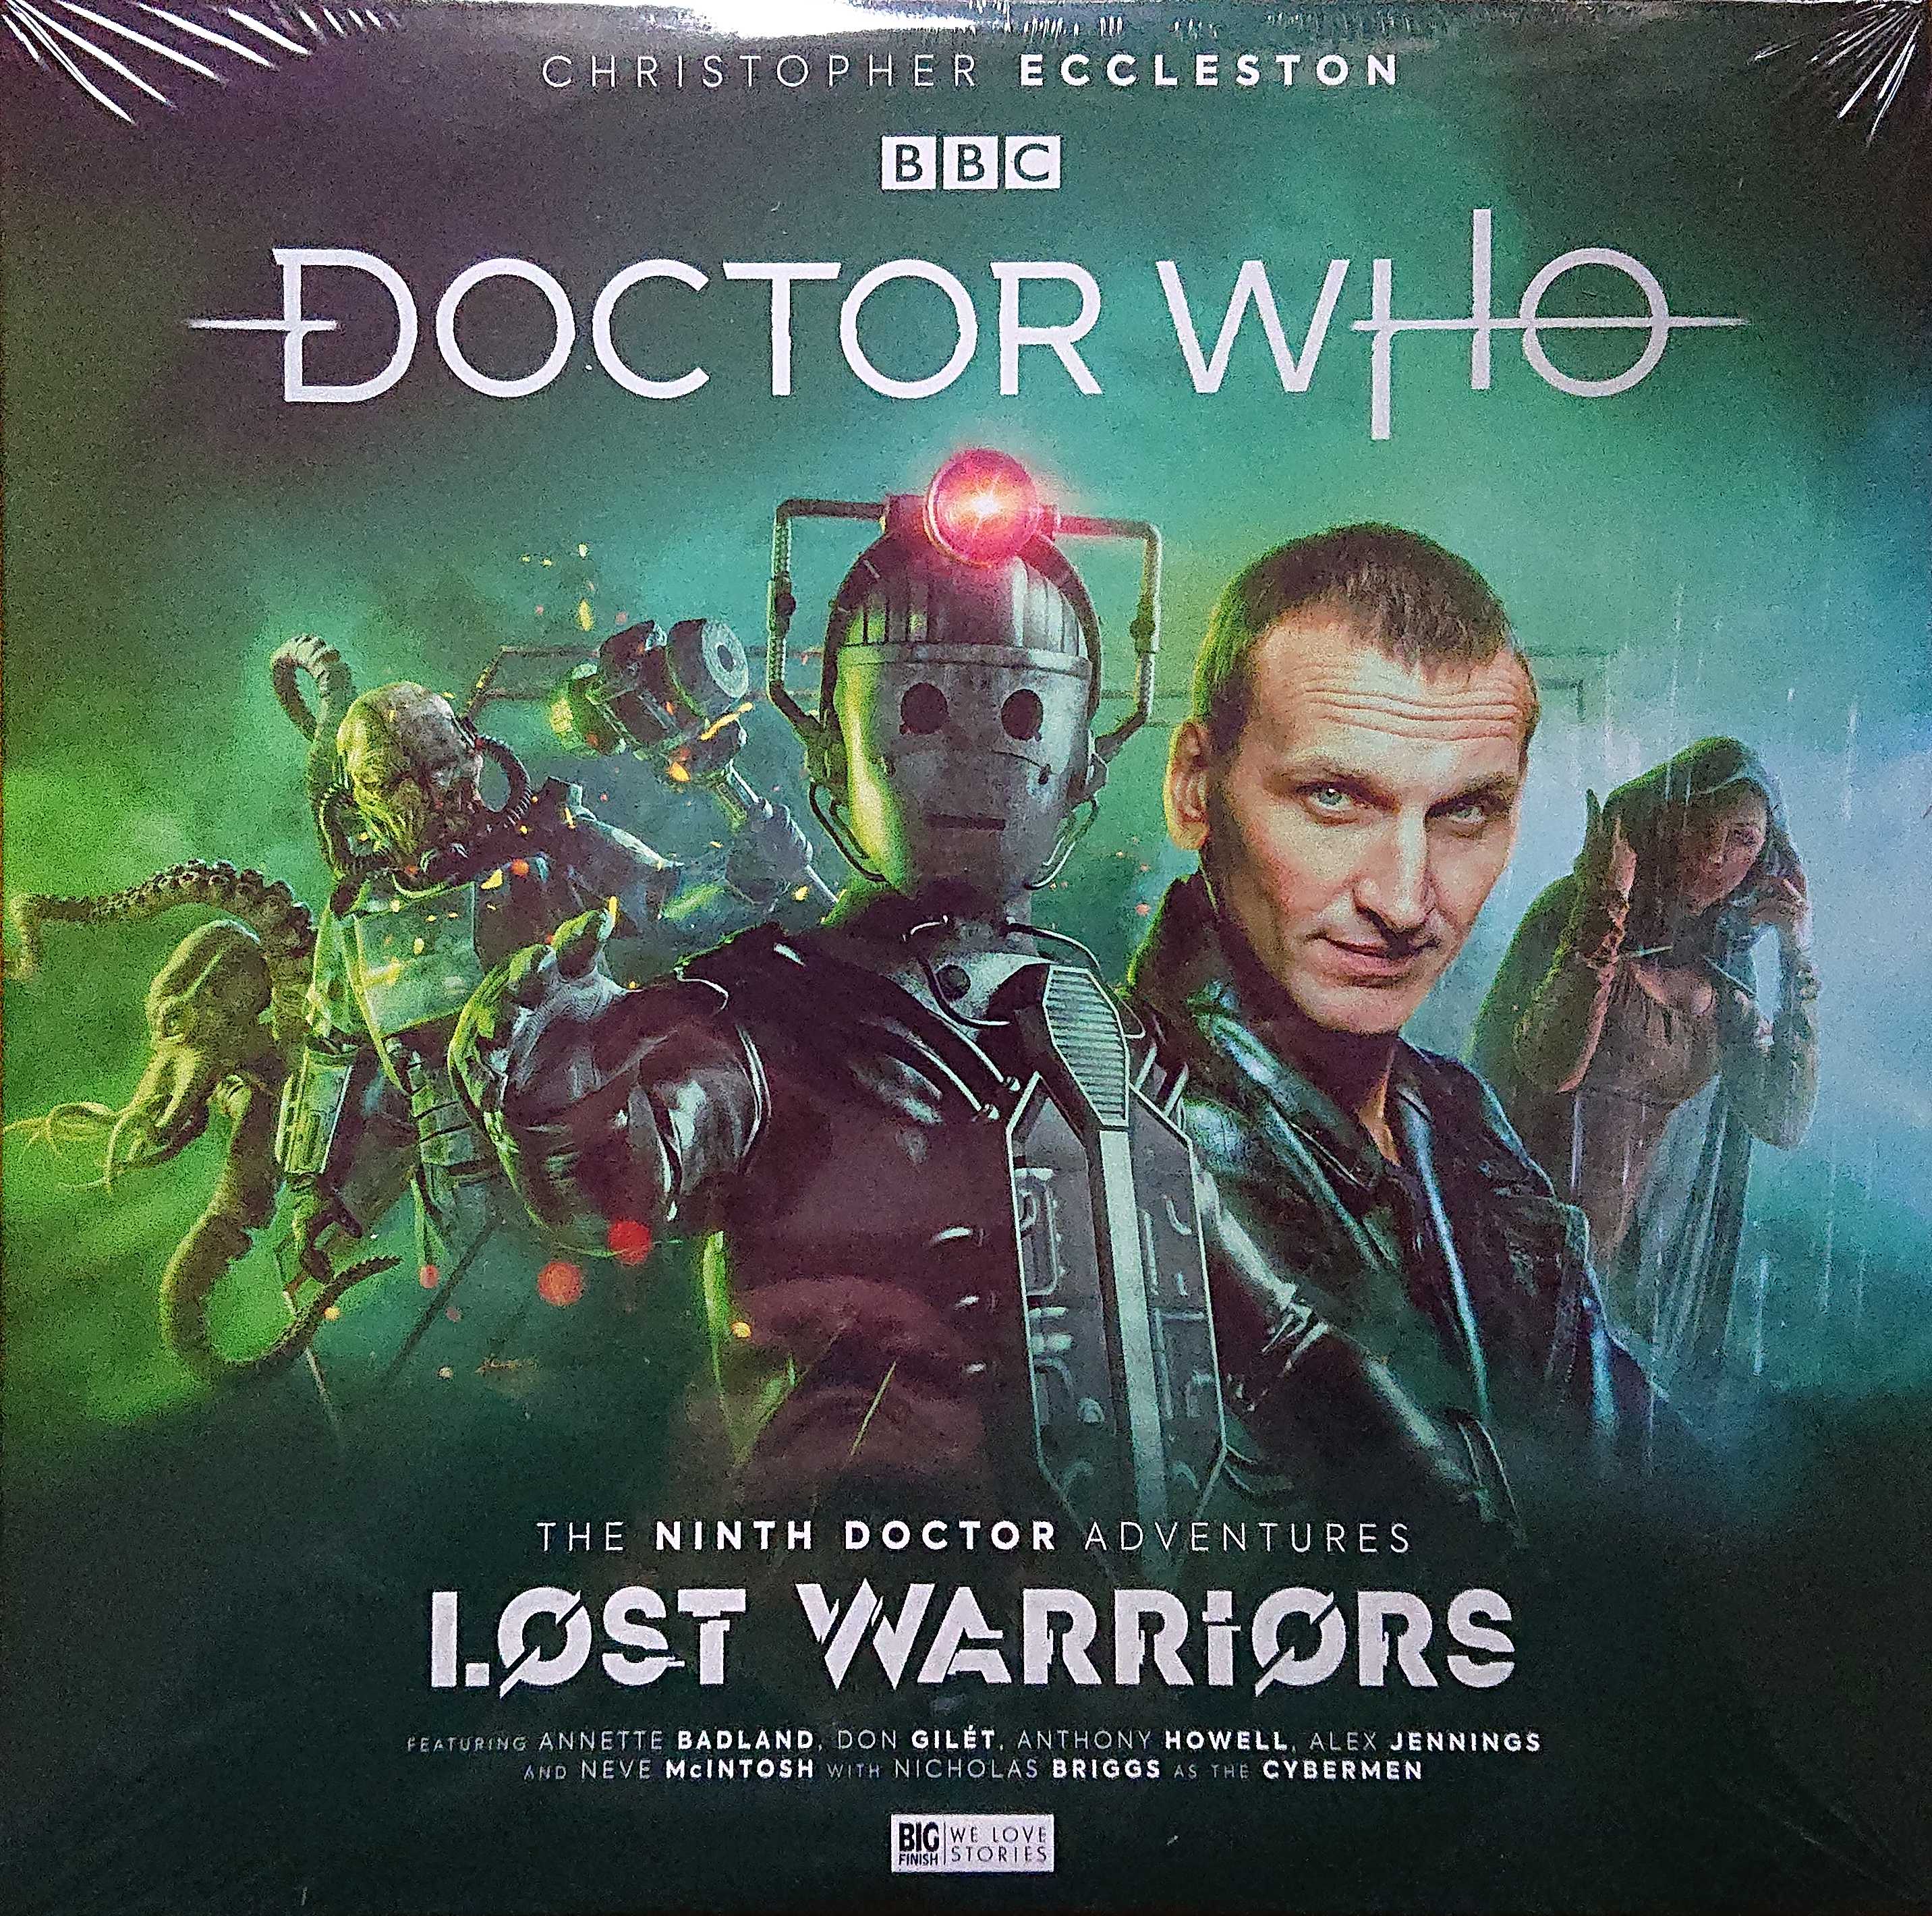 Picture of BFPDW9TH03V Doctor Who - Lost warriors (Limited edition) album by artist James Kettle / Lizzie Hopley / John Dorney from the BBC records and Tapes library